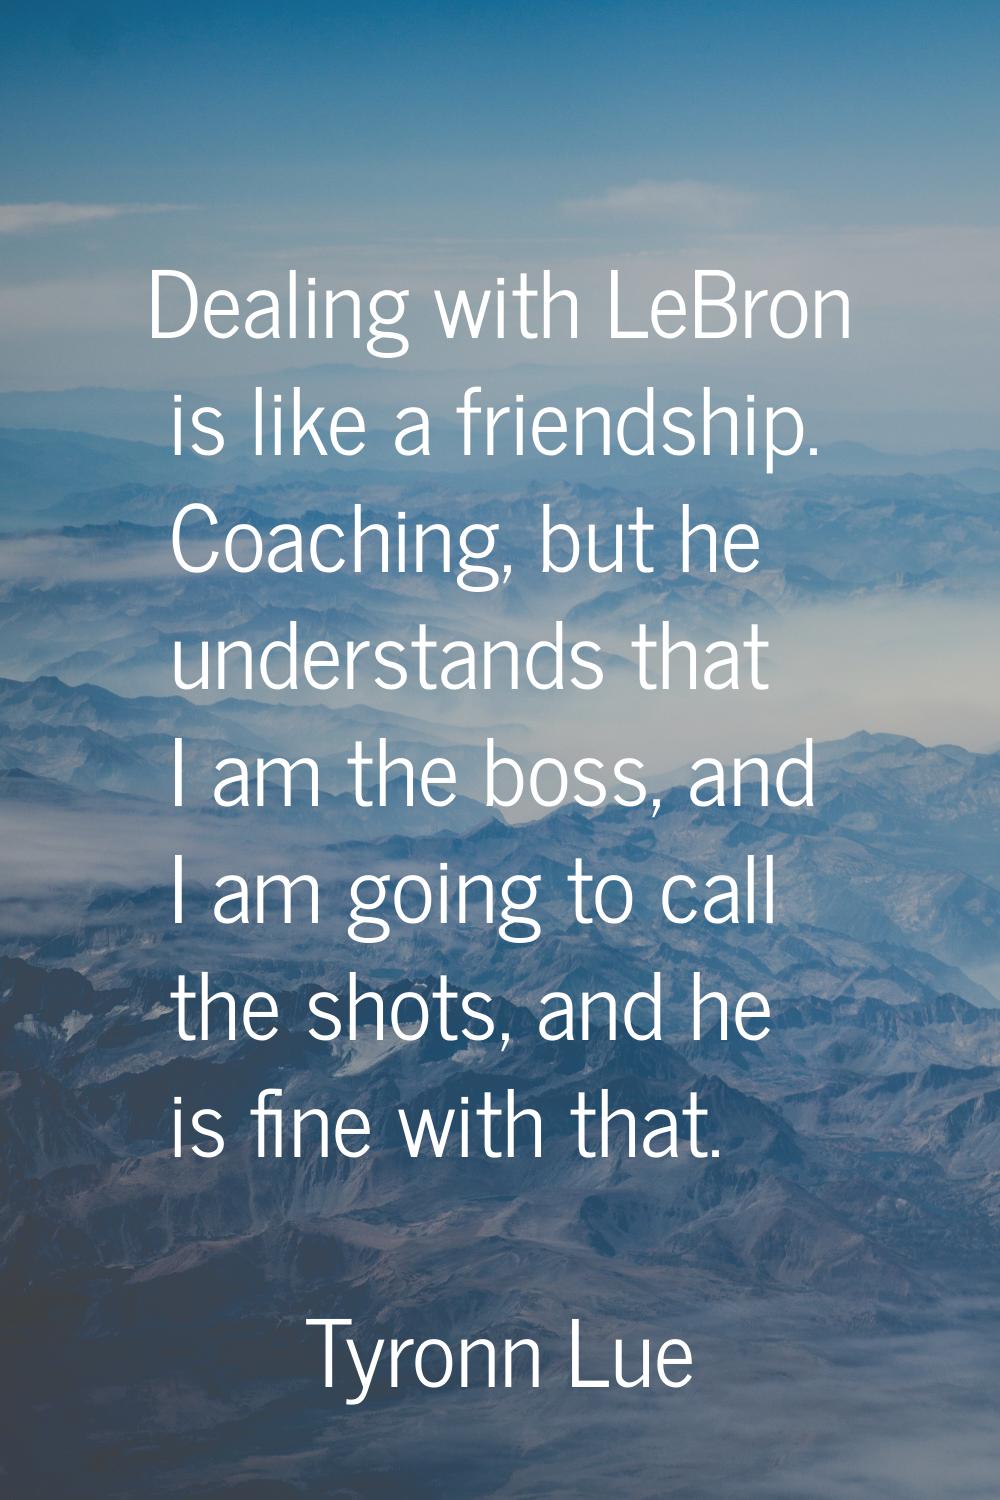 Dealing with LeBron is like a friendship. Coaching, but he understands that I am the boss, and I am